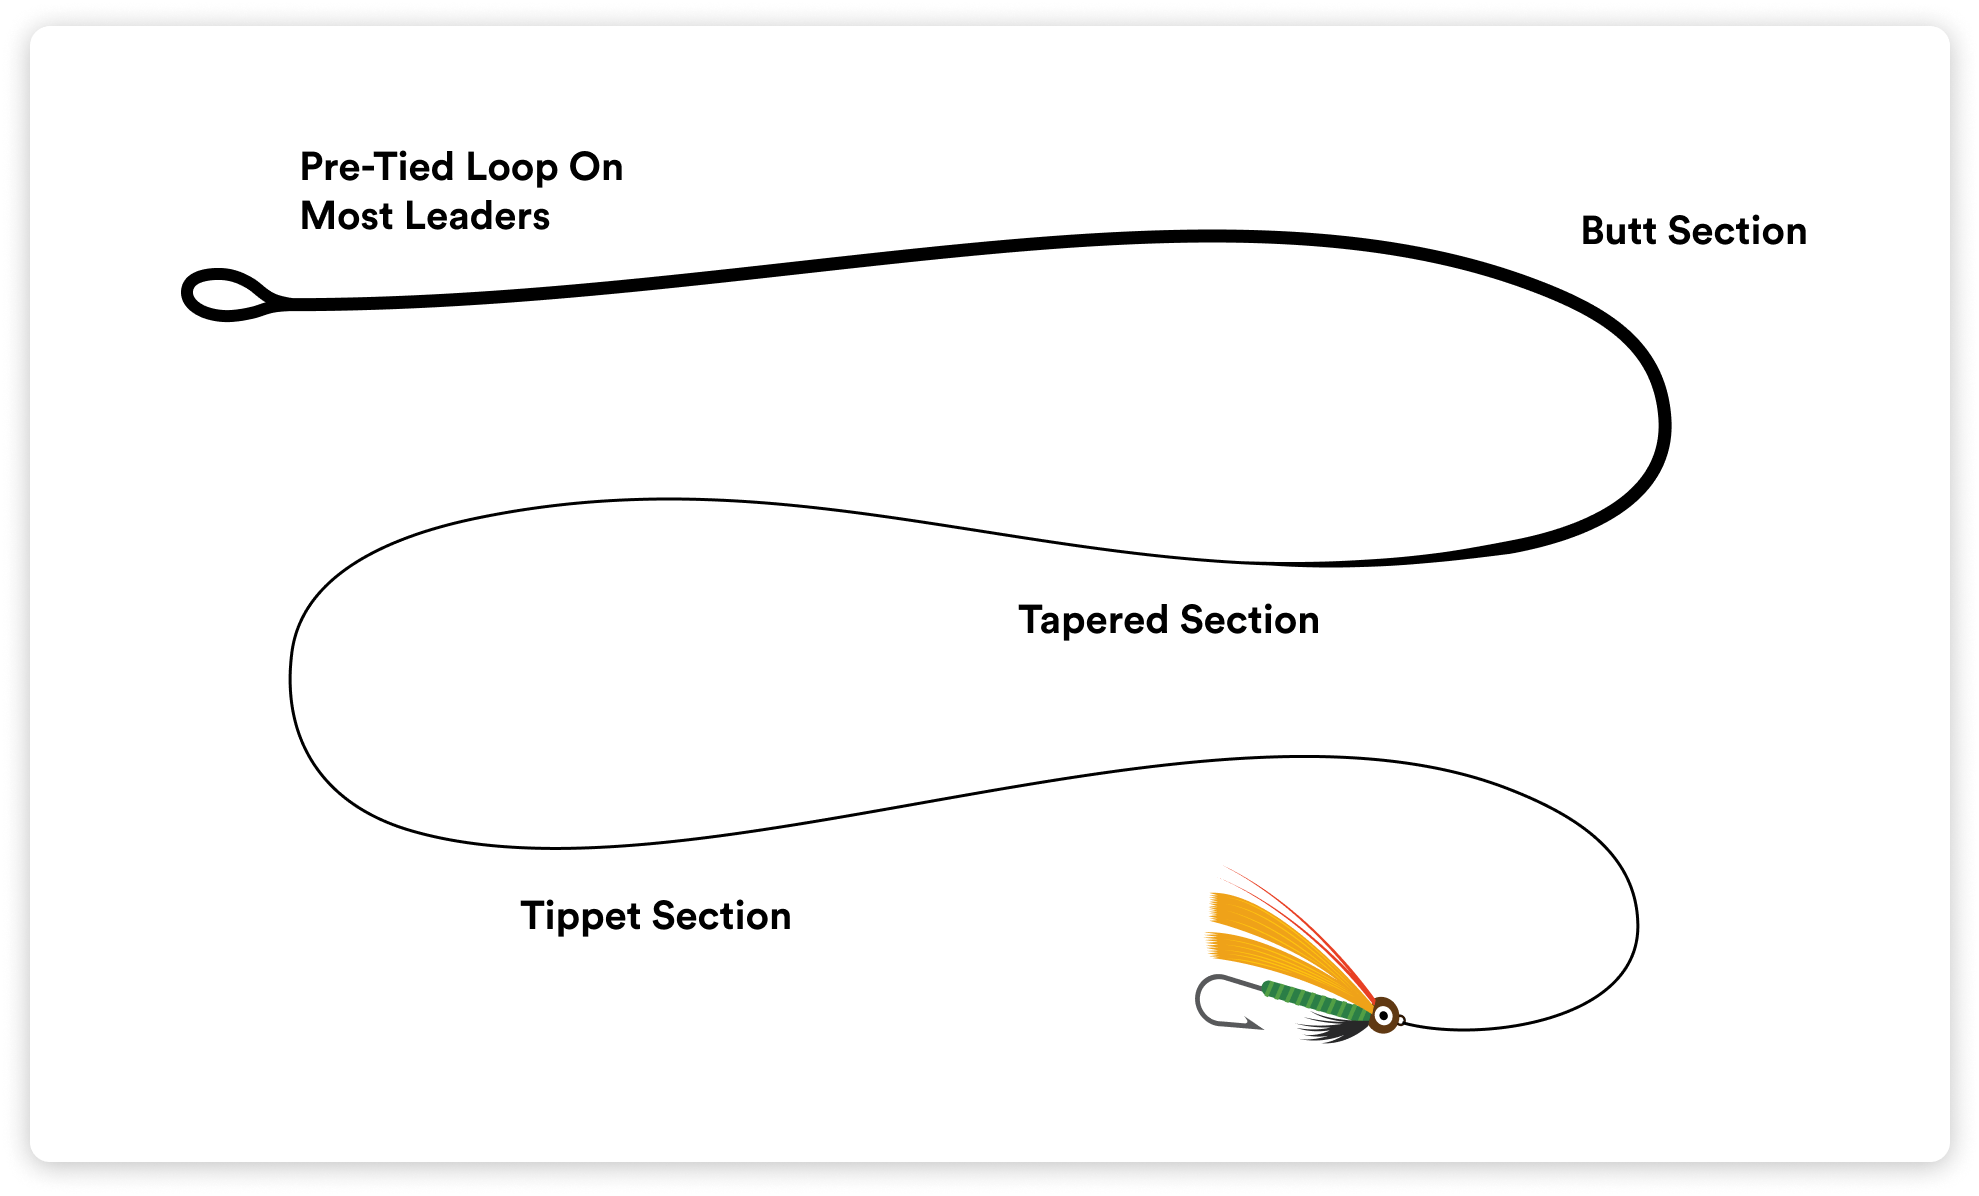 A diagram showing the leader with the taper section and butt section labeled.